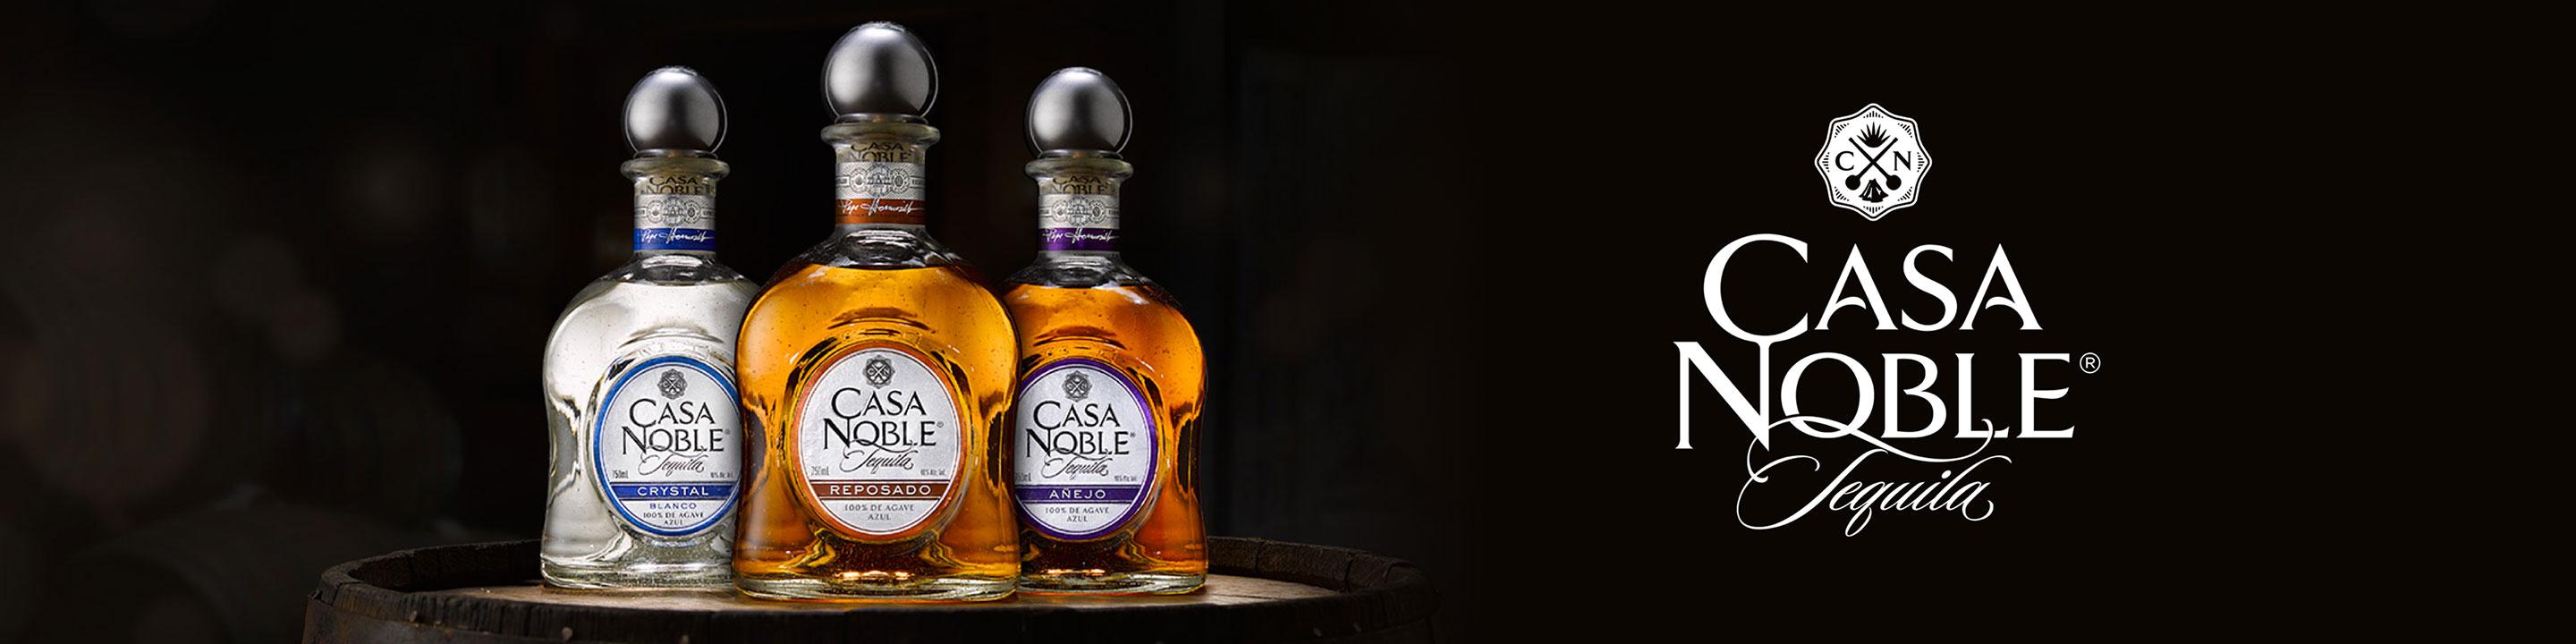  To craft superior tequila worth sharing, that's Casa Noble's pursuit. The tequila is made from estate-grown agaves cooked in traditional stone ovens; these are naturally fermented and distilled three times.  Buy Casa Noble online now from your nearby liquor store via Minibar Delivery.